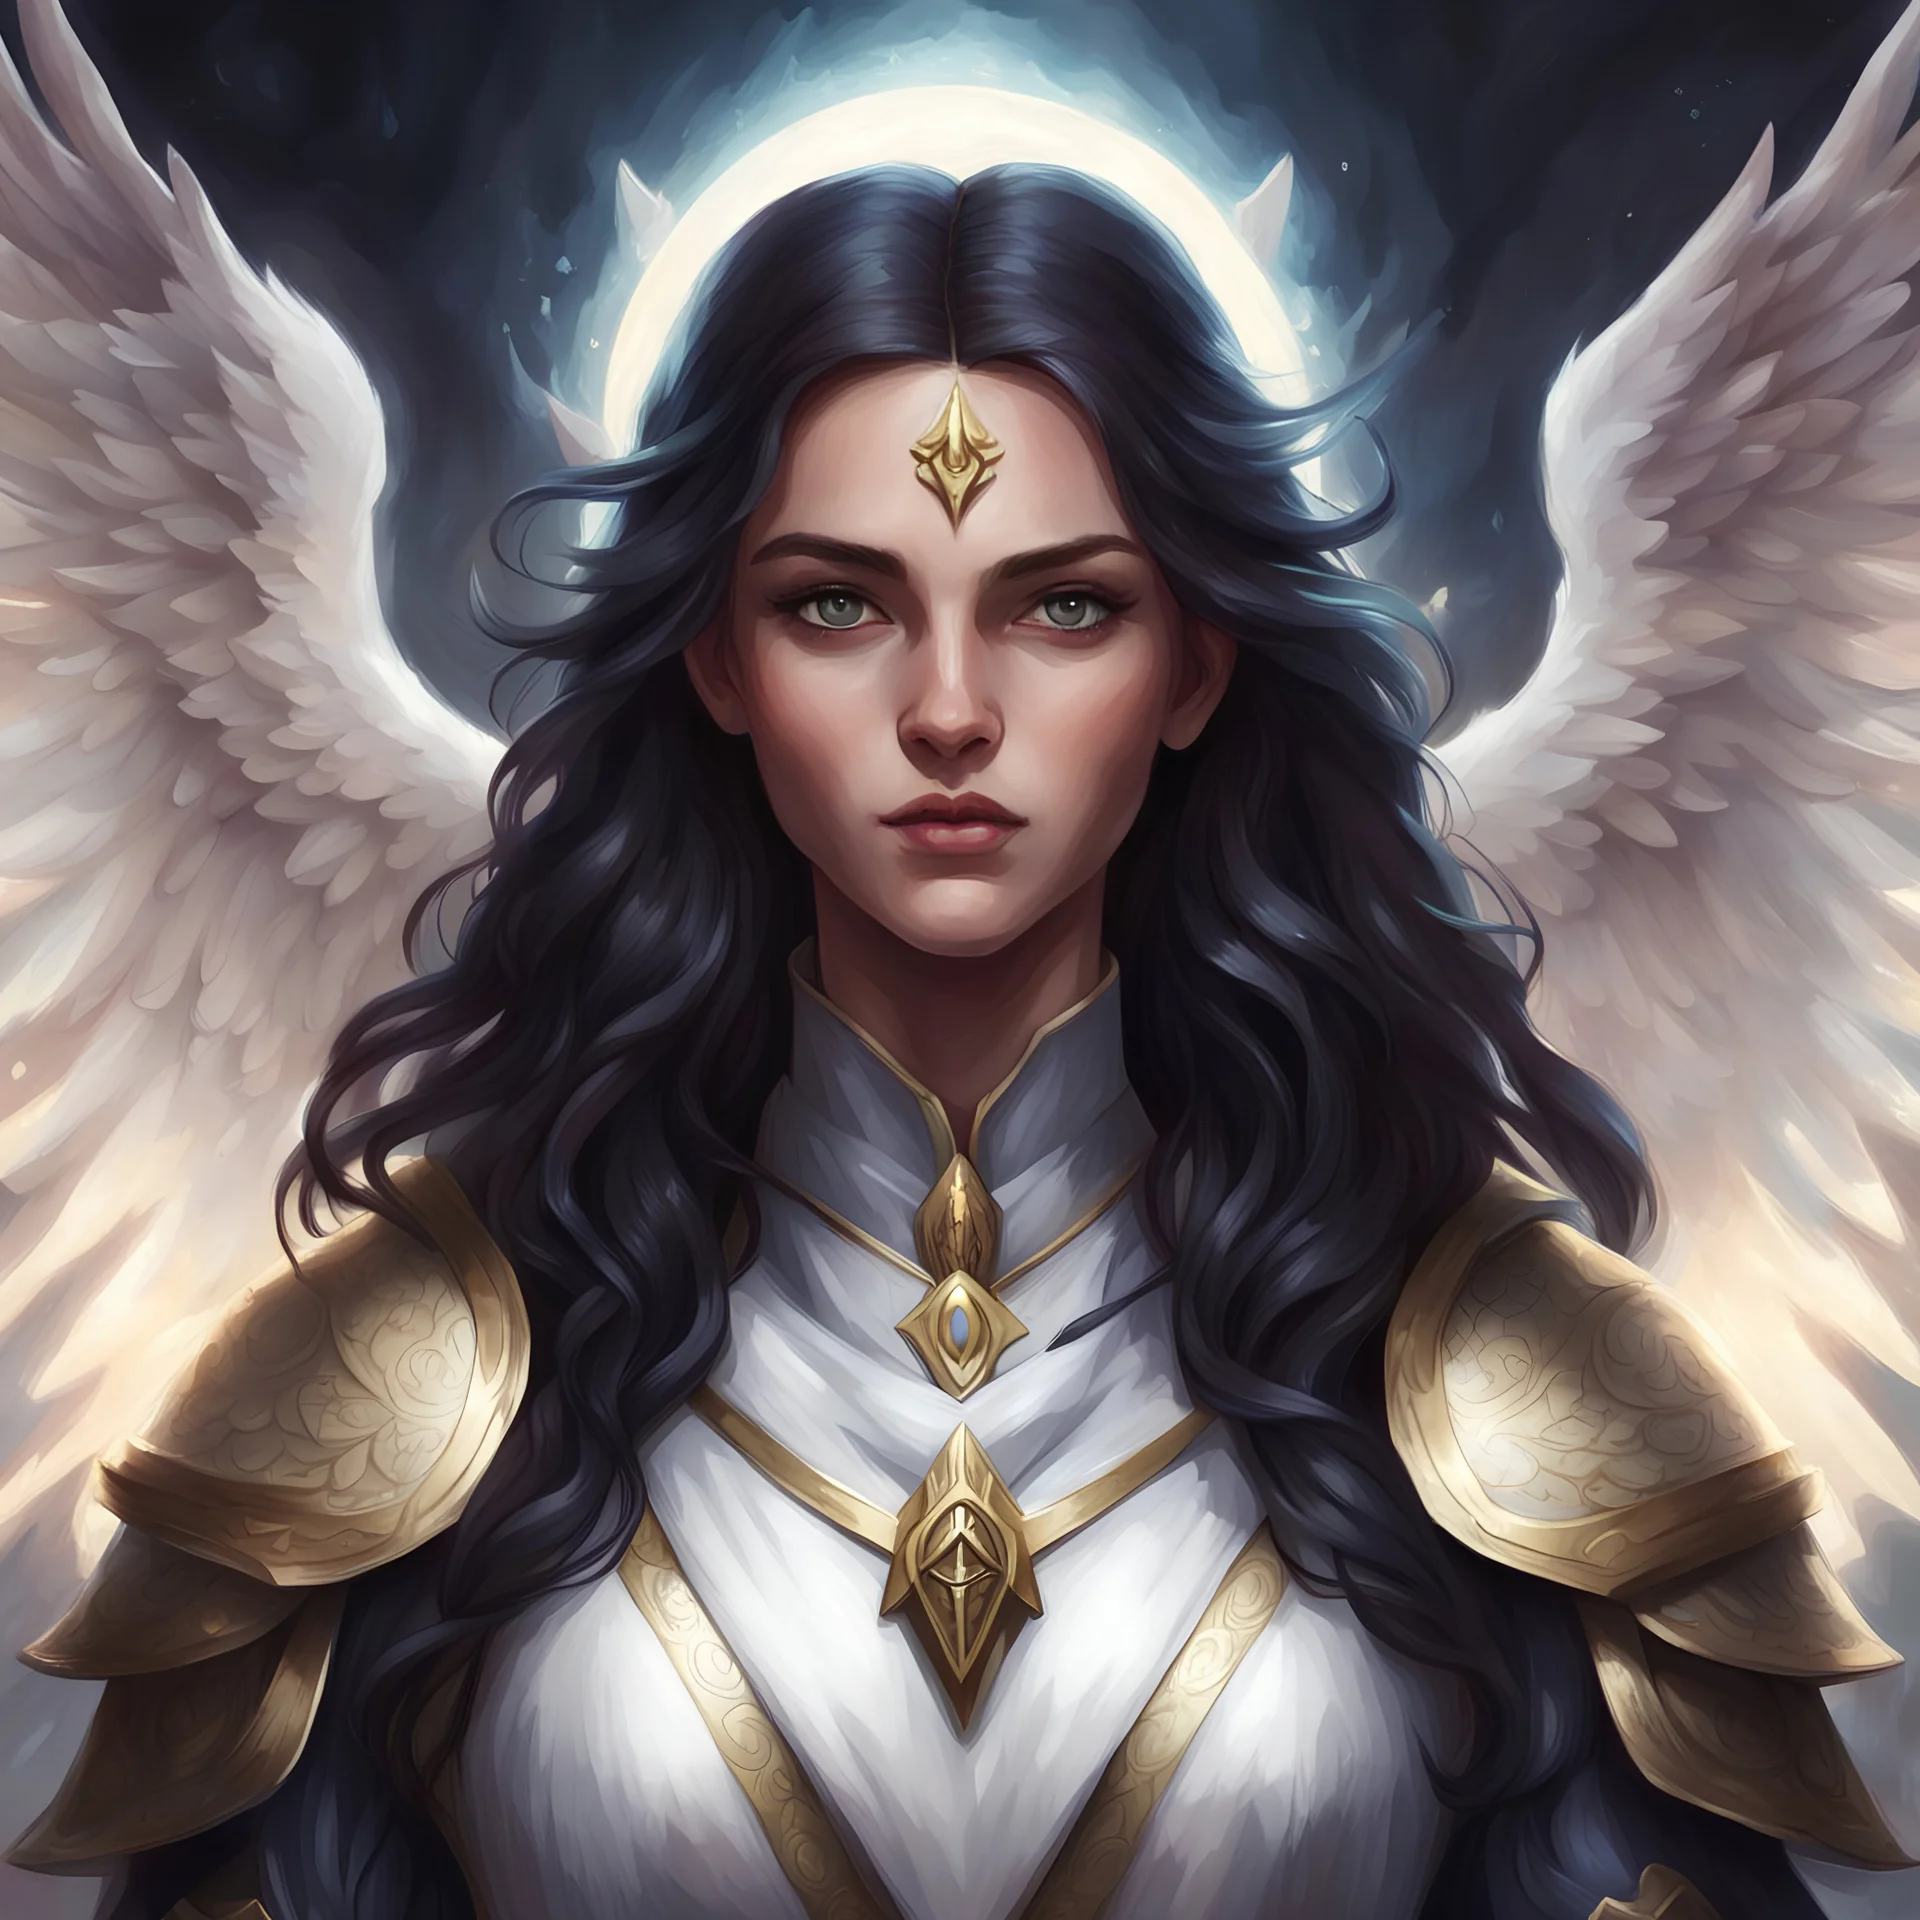 Generate a dungeons and dragons character portrait of the face of a female cleric of peace aasimar blessed by the goddess Selune. She has dark hair